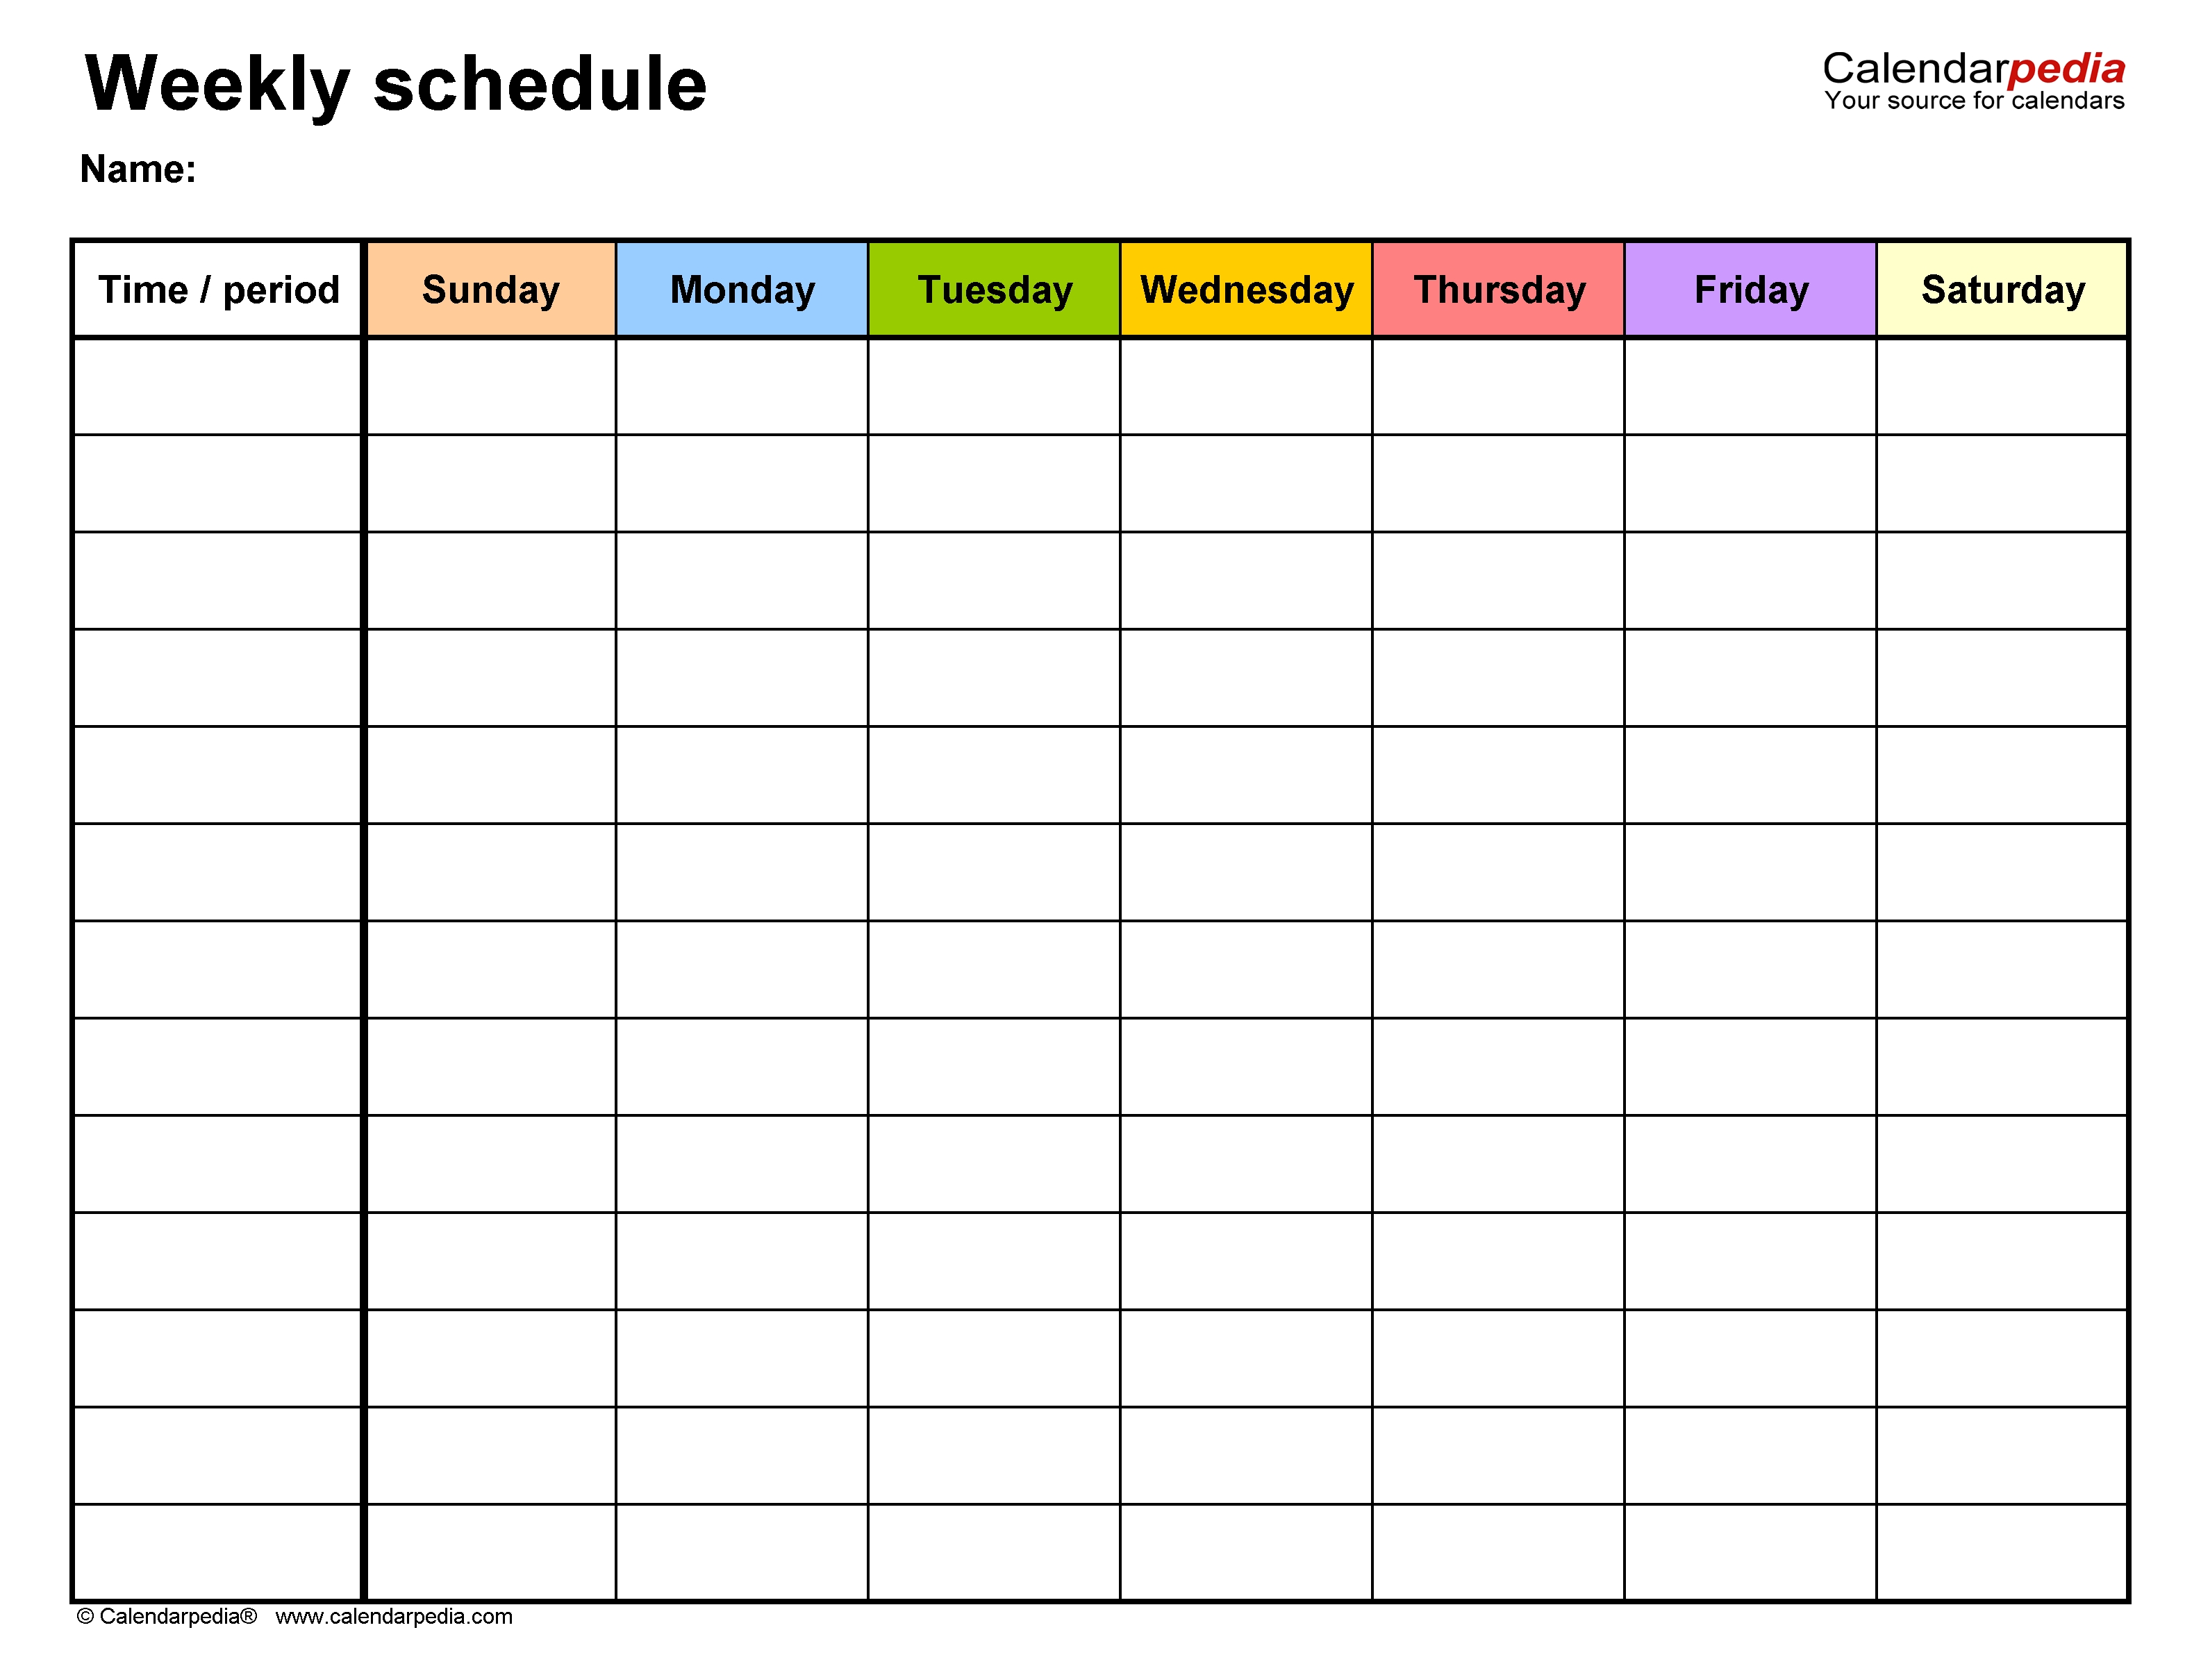 Free Weekly Schedules For Pdf - 18 Templates Week Calendar Template Pdf